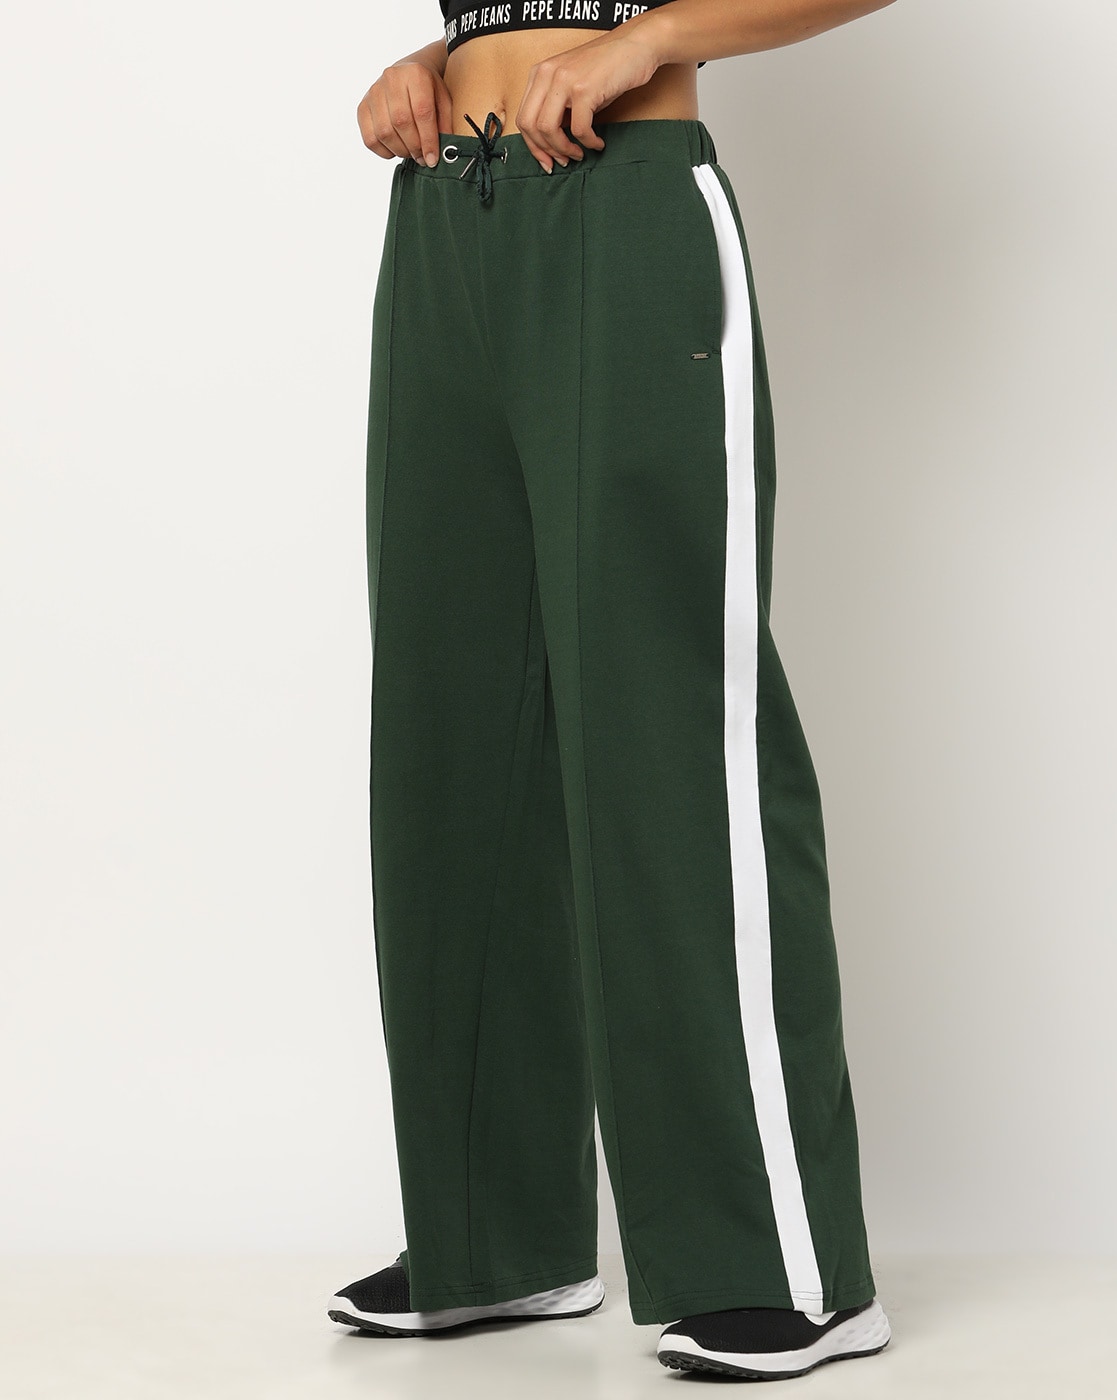 Pepe Jeans Jared green trousers - ESD Store fashion, footwear and  accessories - best brands shoes and designer shoes